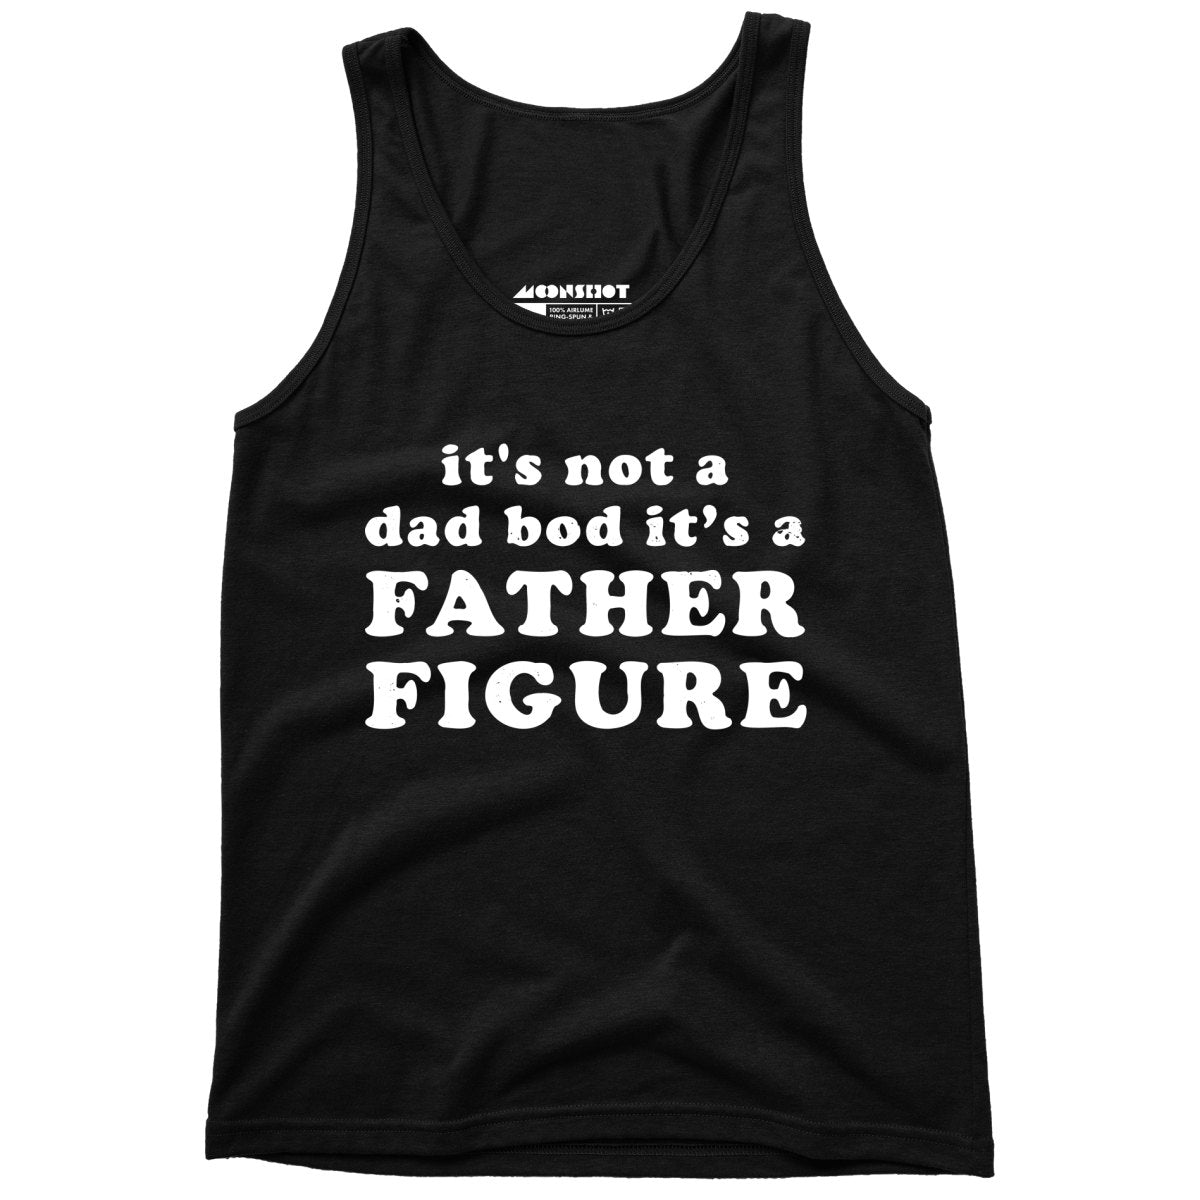 It's Not a Dad Bod It's a Father Figure - Unisex Tank Top